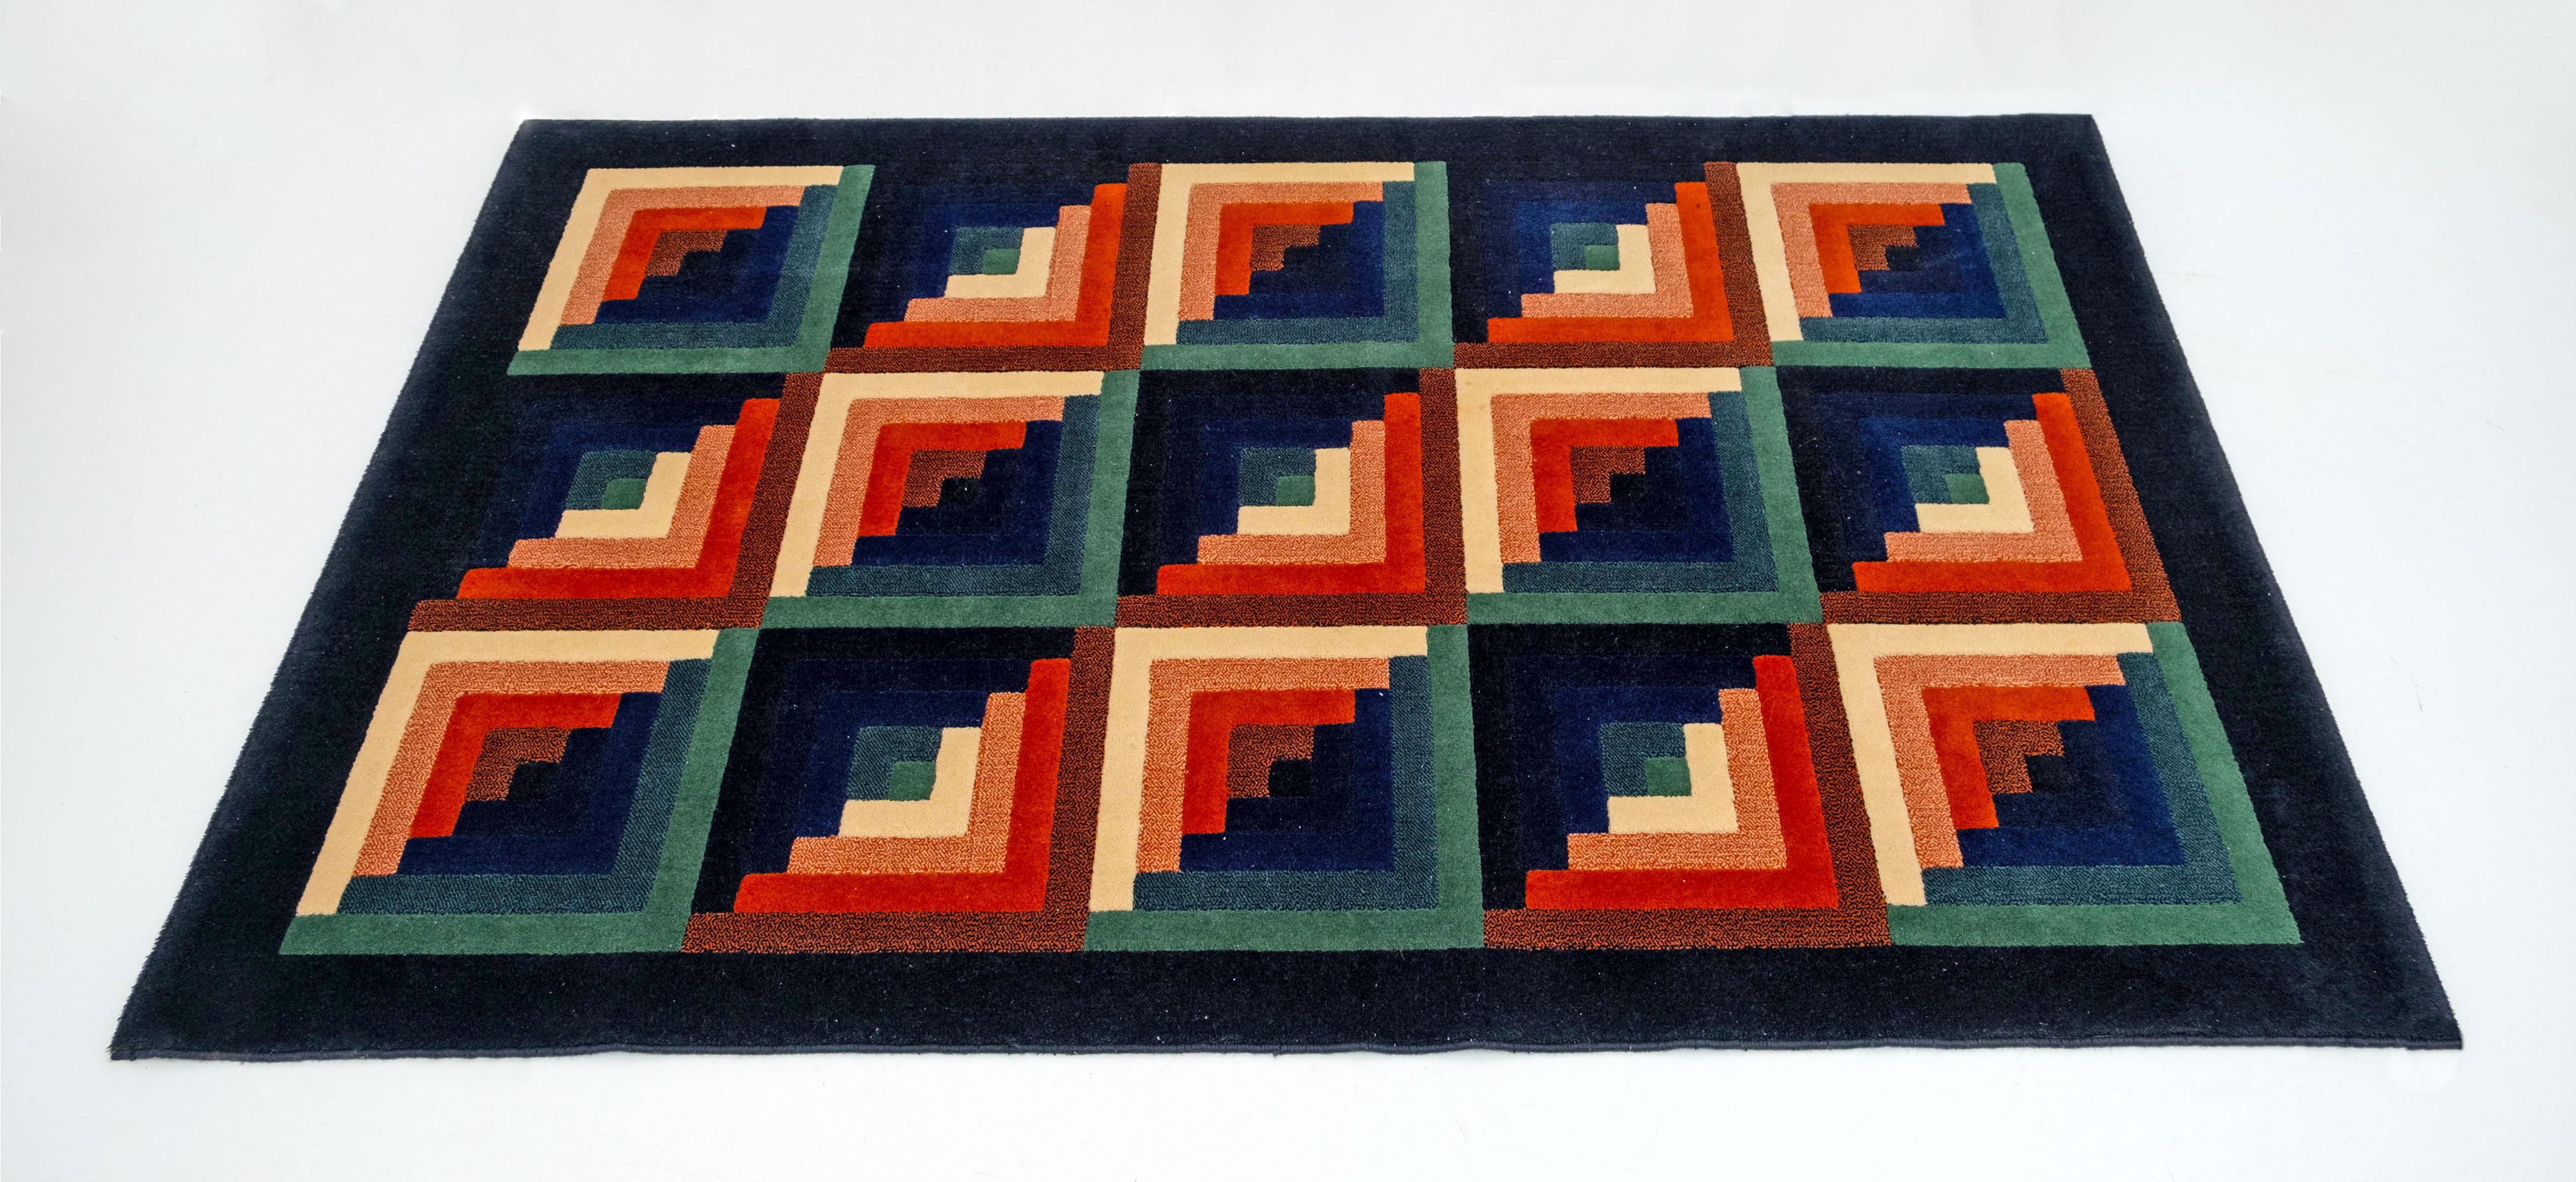 This vintage Ottavio Missoni carpet was made in the 1980s in pure virgin wool by the T&J Vestor company, founded in 1921 by Rosita Missoni, and now acquired by Missoni Home. this beautiful optical carpet features geometric motifs that form squares